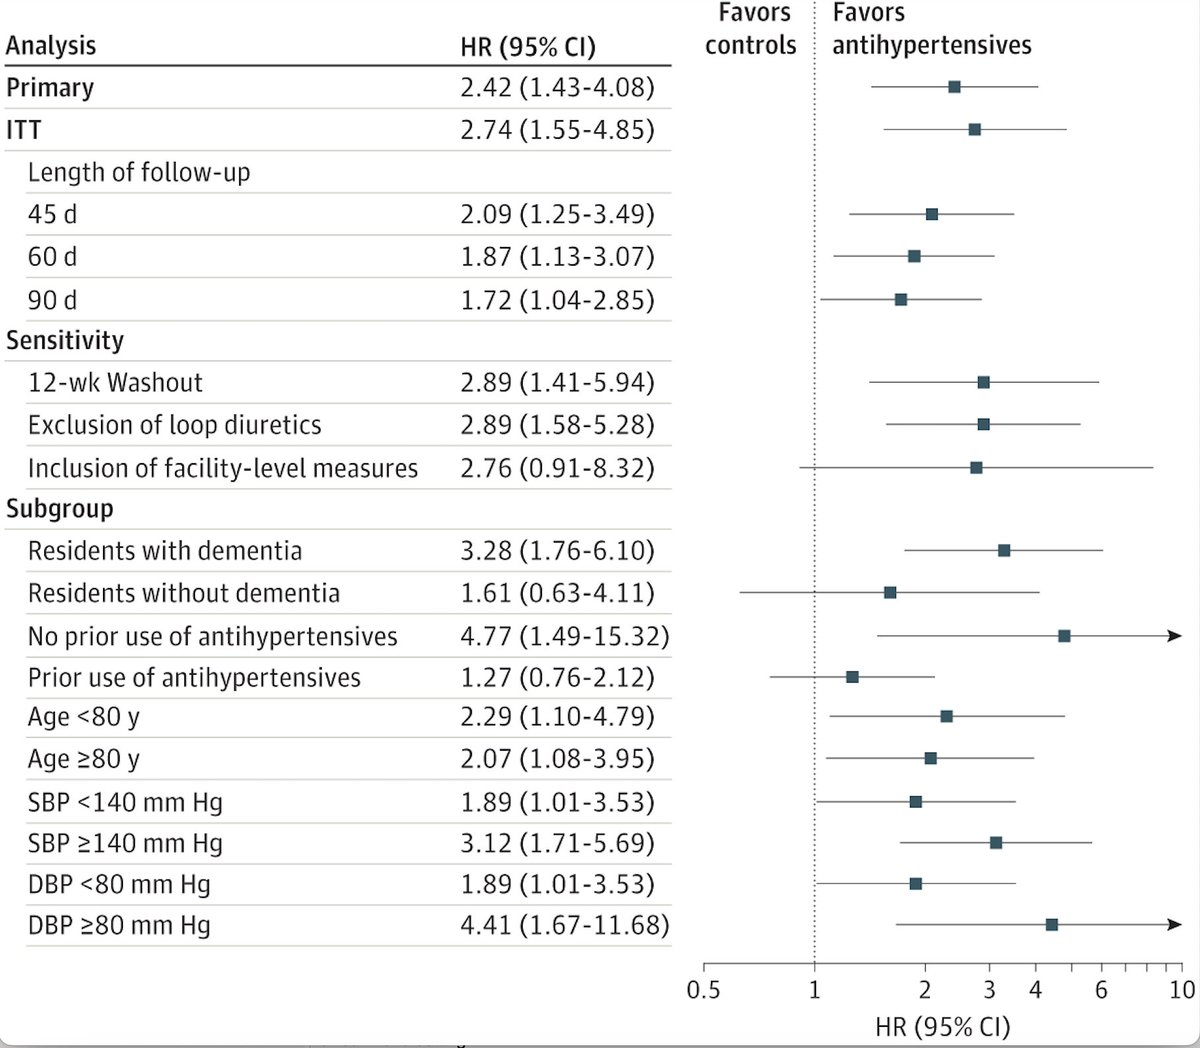 Antihypertensive medications in older adults associated with elevated risks of fractures and falls Should we be de-intensifying therapies in certain groups #Inertia jamanetwork.com/journals/jamai…